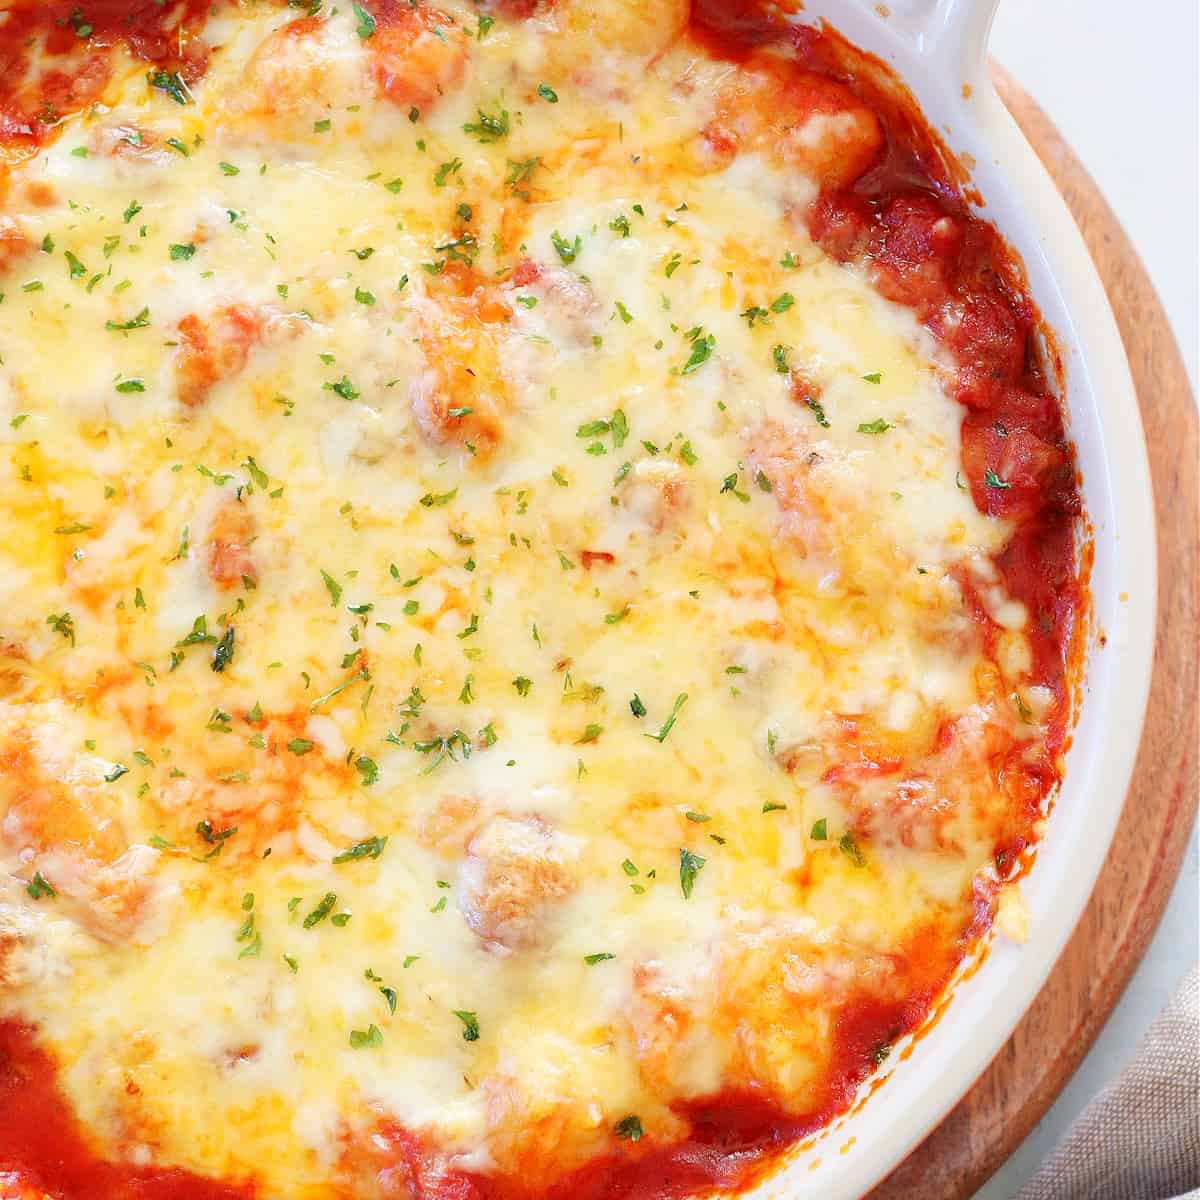 Cheesy top on baked gnocchi in dish.